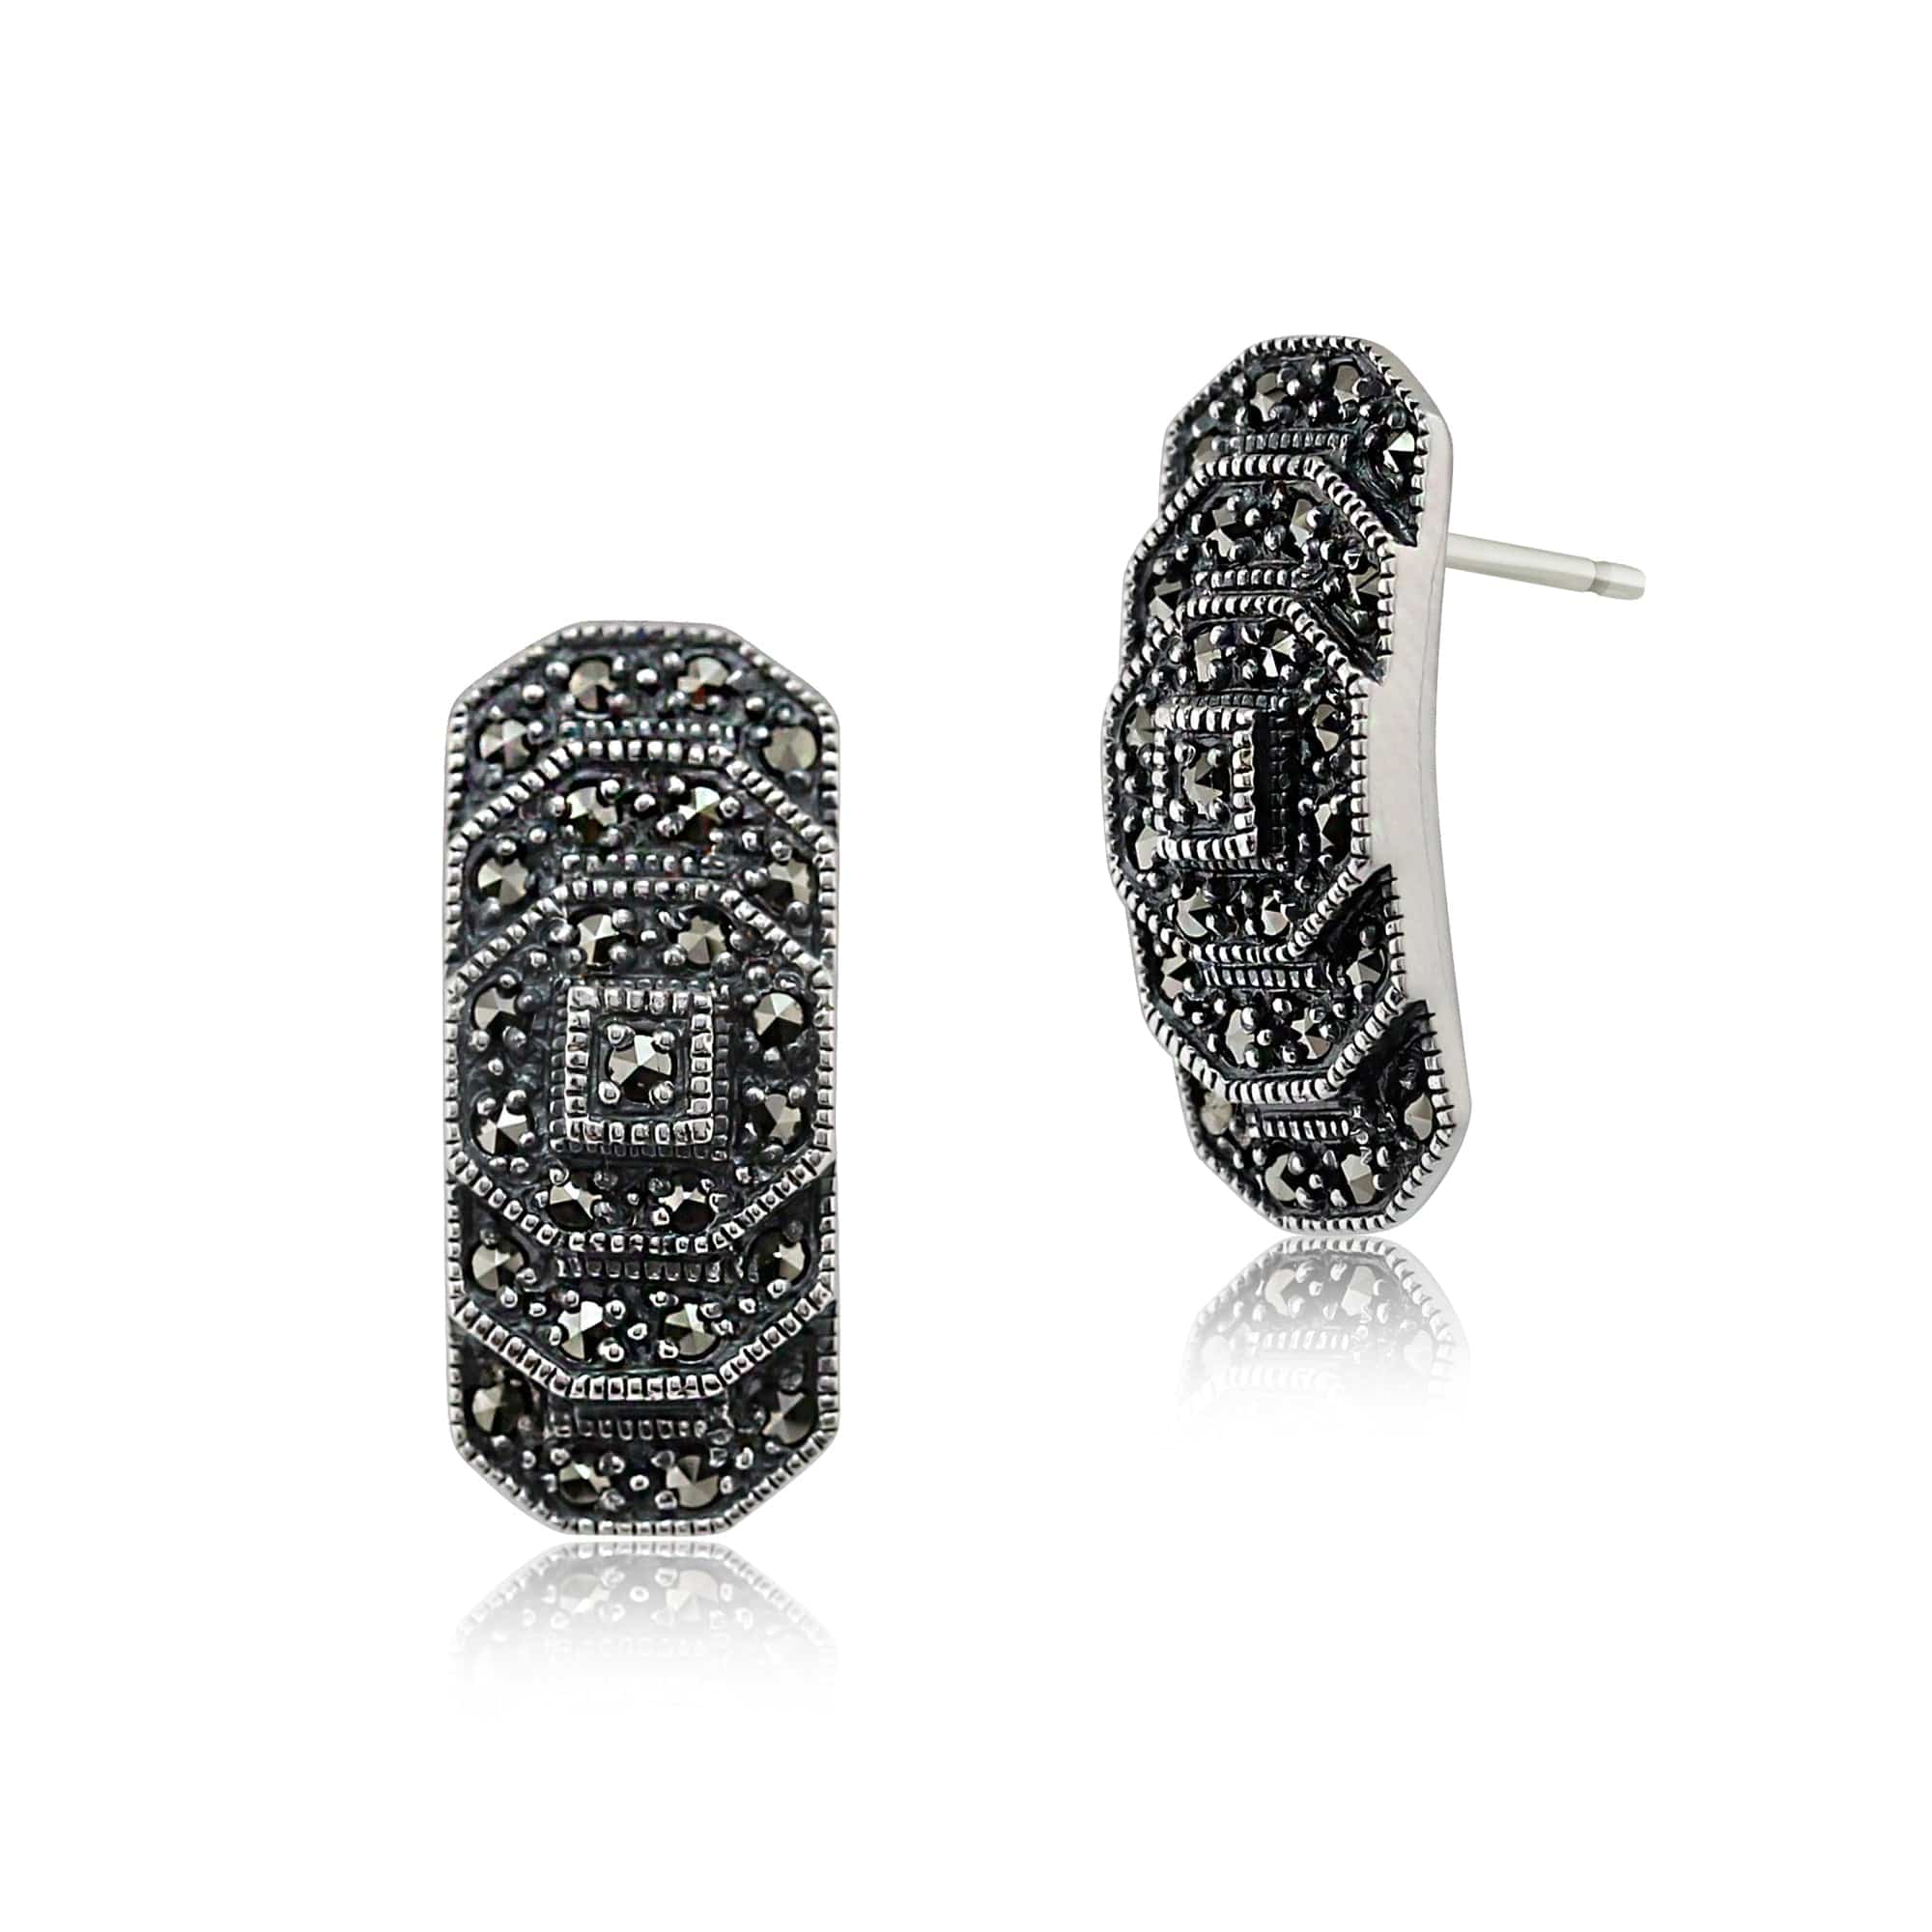 Art Deco Style Round Marcasite Stepped Stud Earrings in 925 Sterling Silver - Gemondo